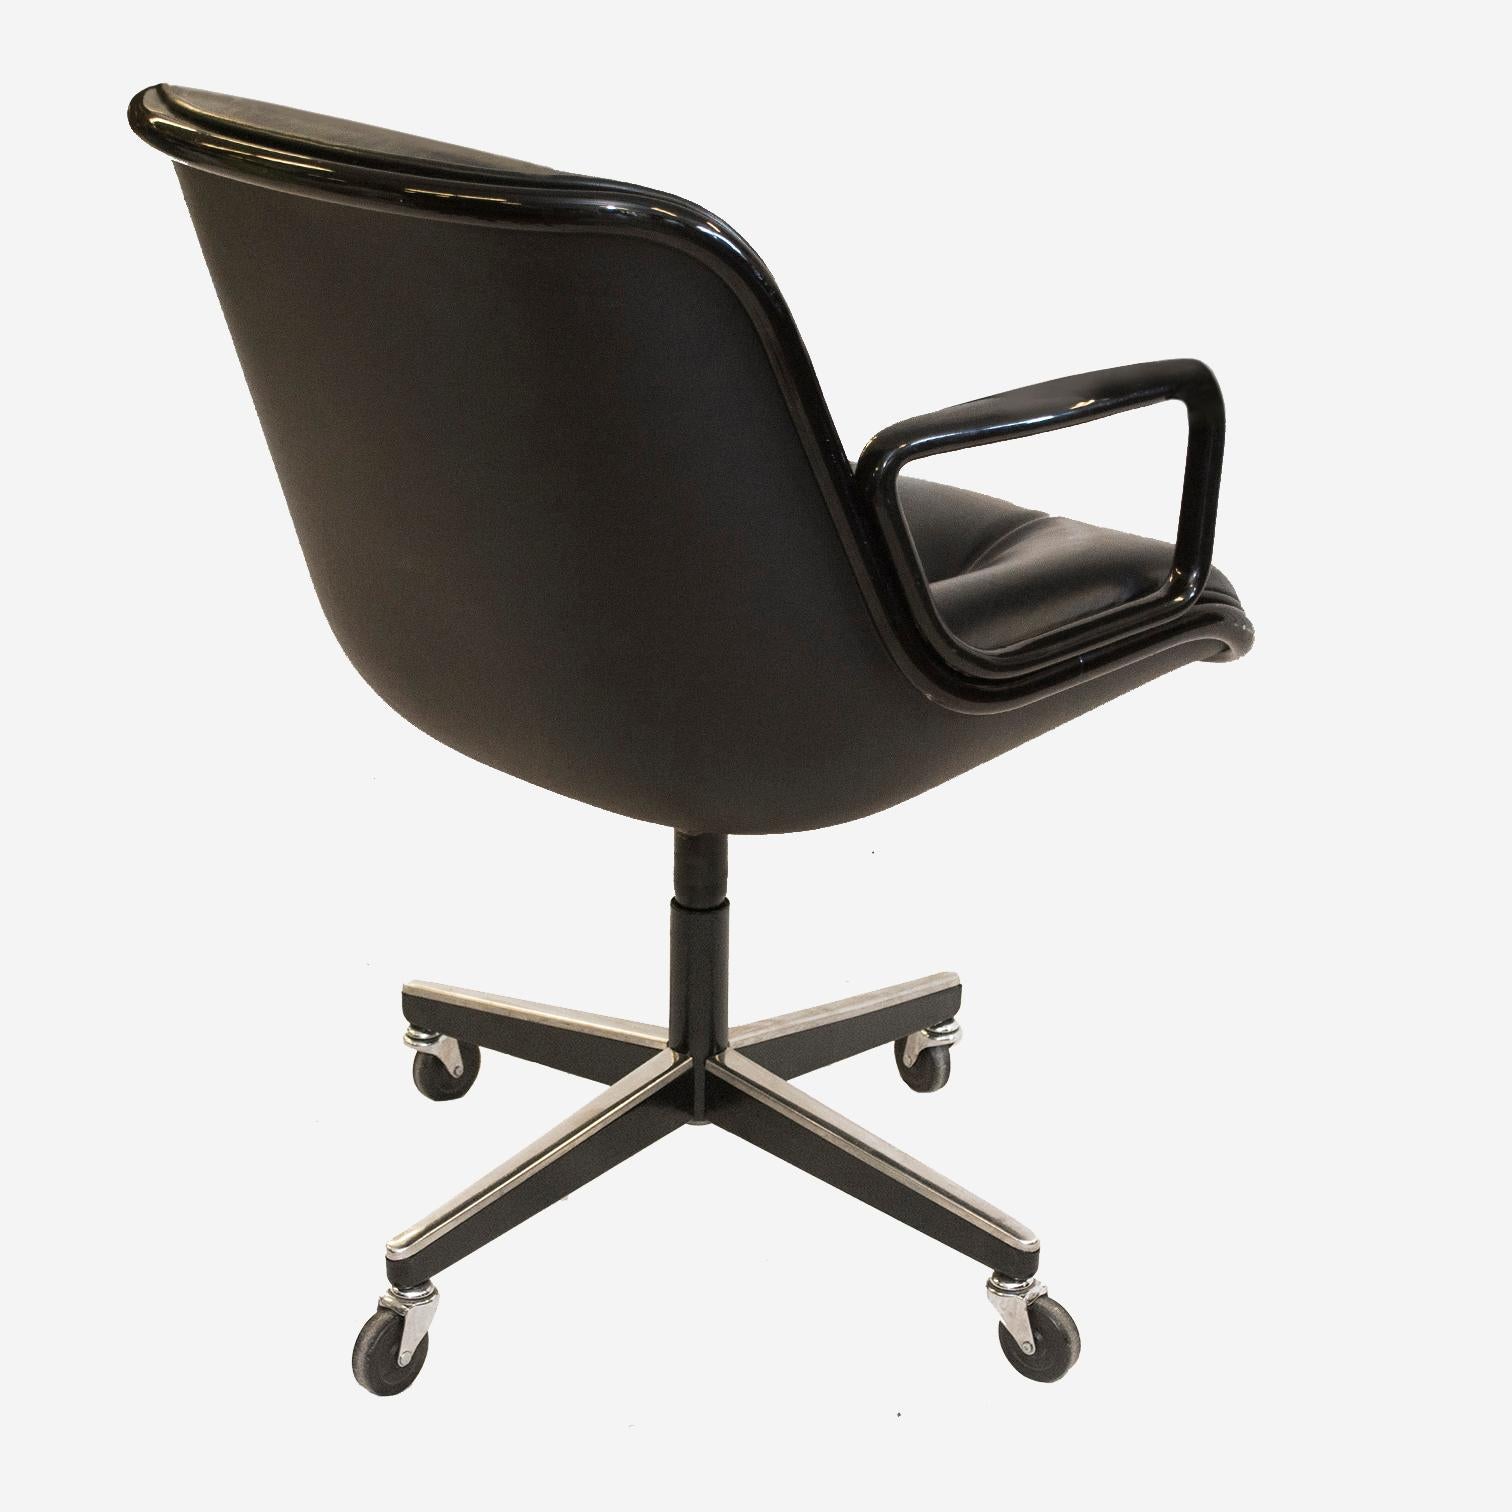 North American Vintage Knoll Pollock Swivel Chair in Black Leather, Matte Black Frame